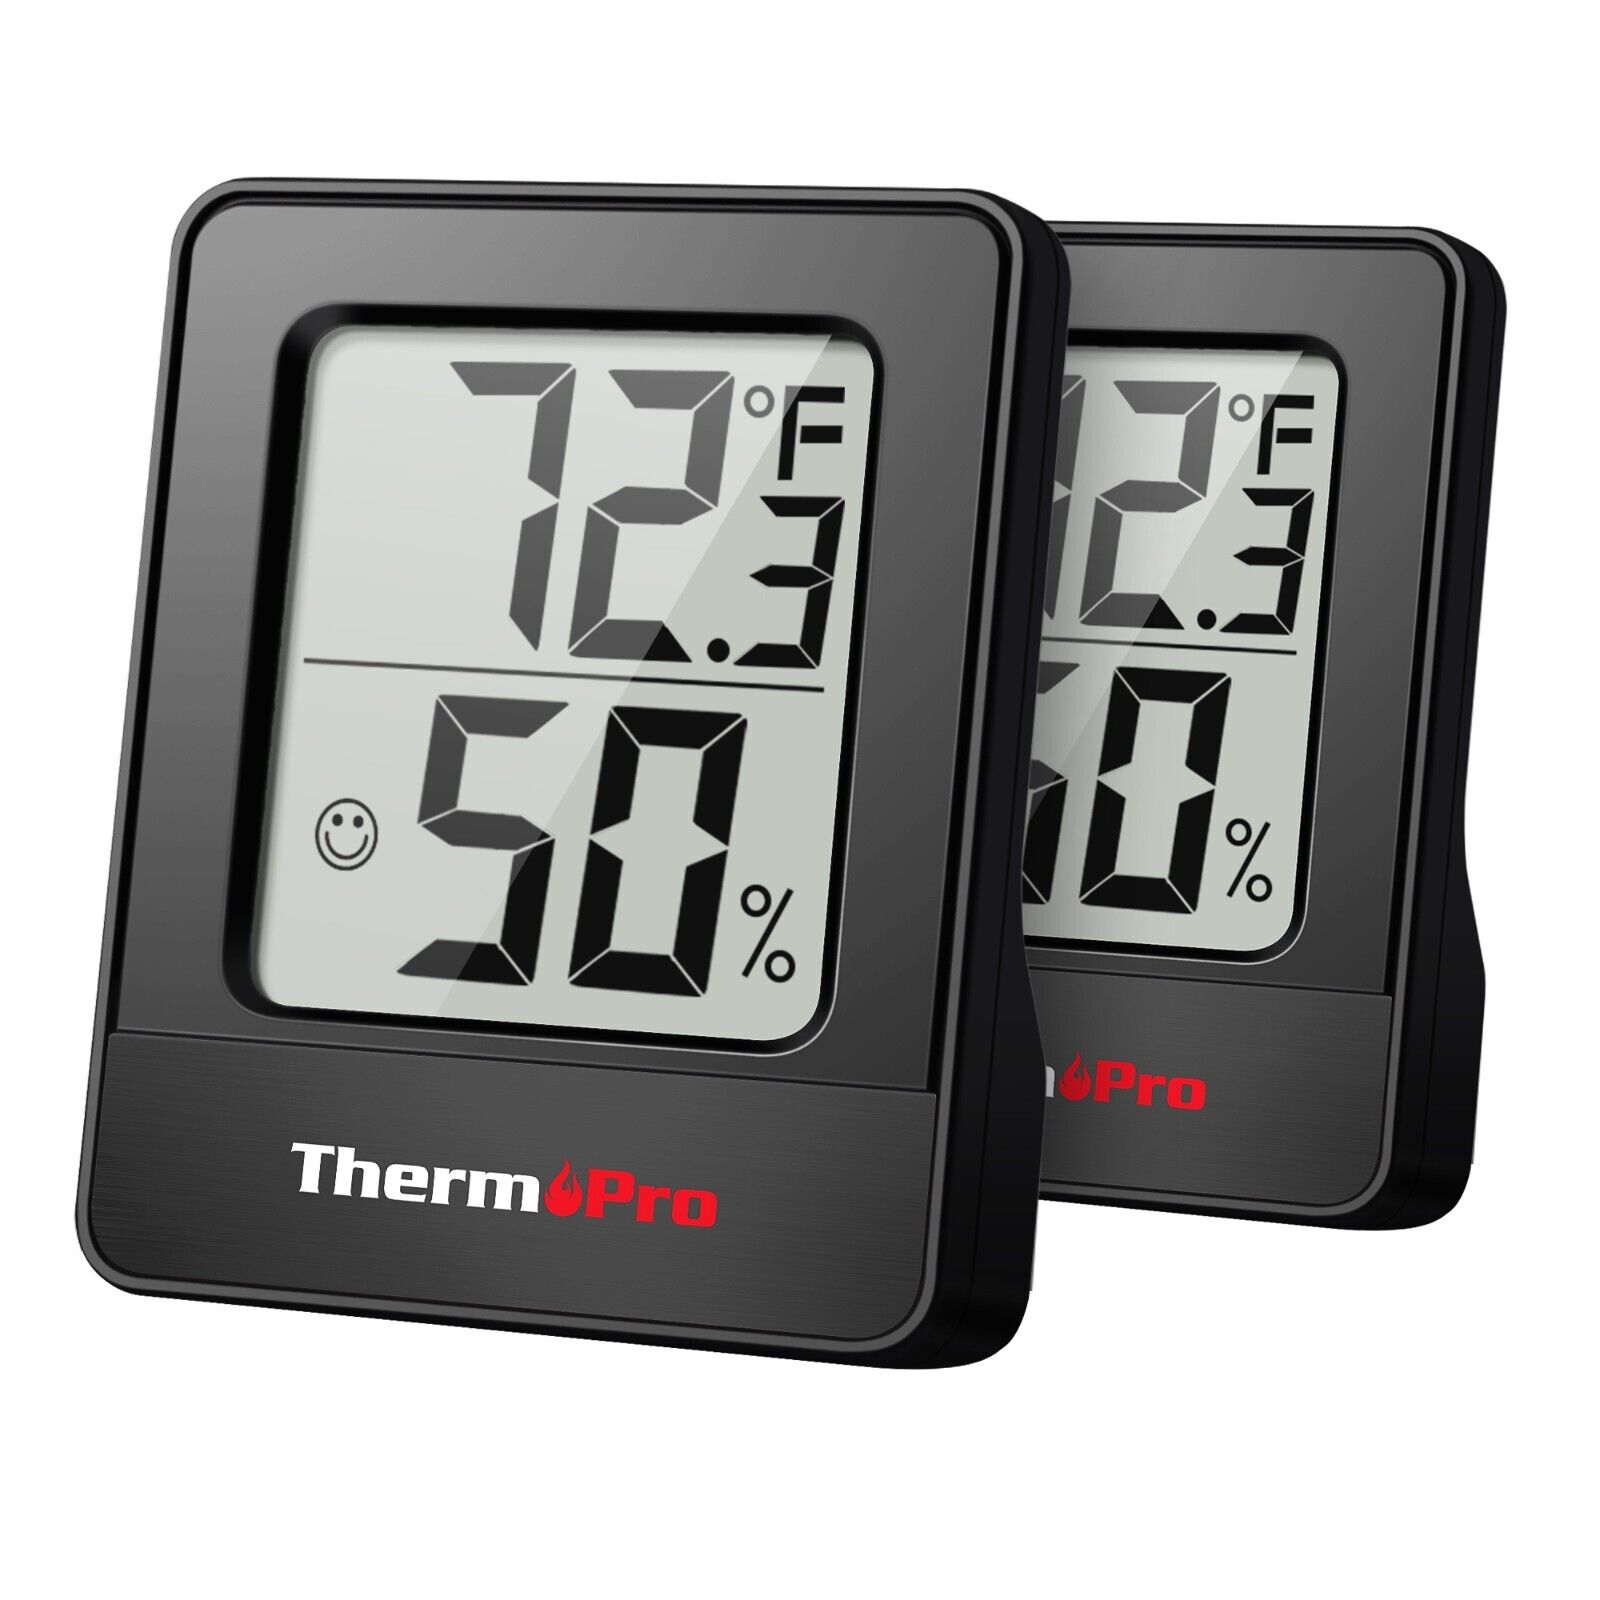 2pcs ThermoPro TP49BW Thermometer Hygrometer  Digital Temperature Humidity Meter